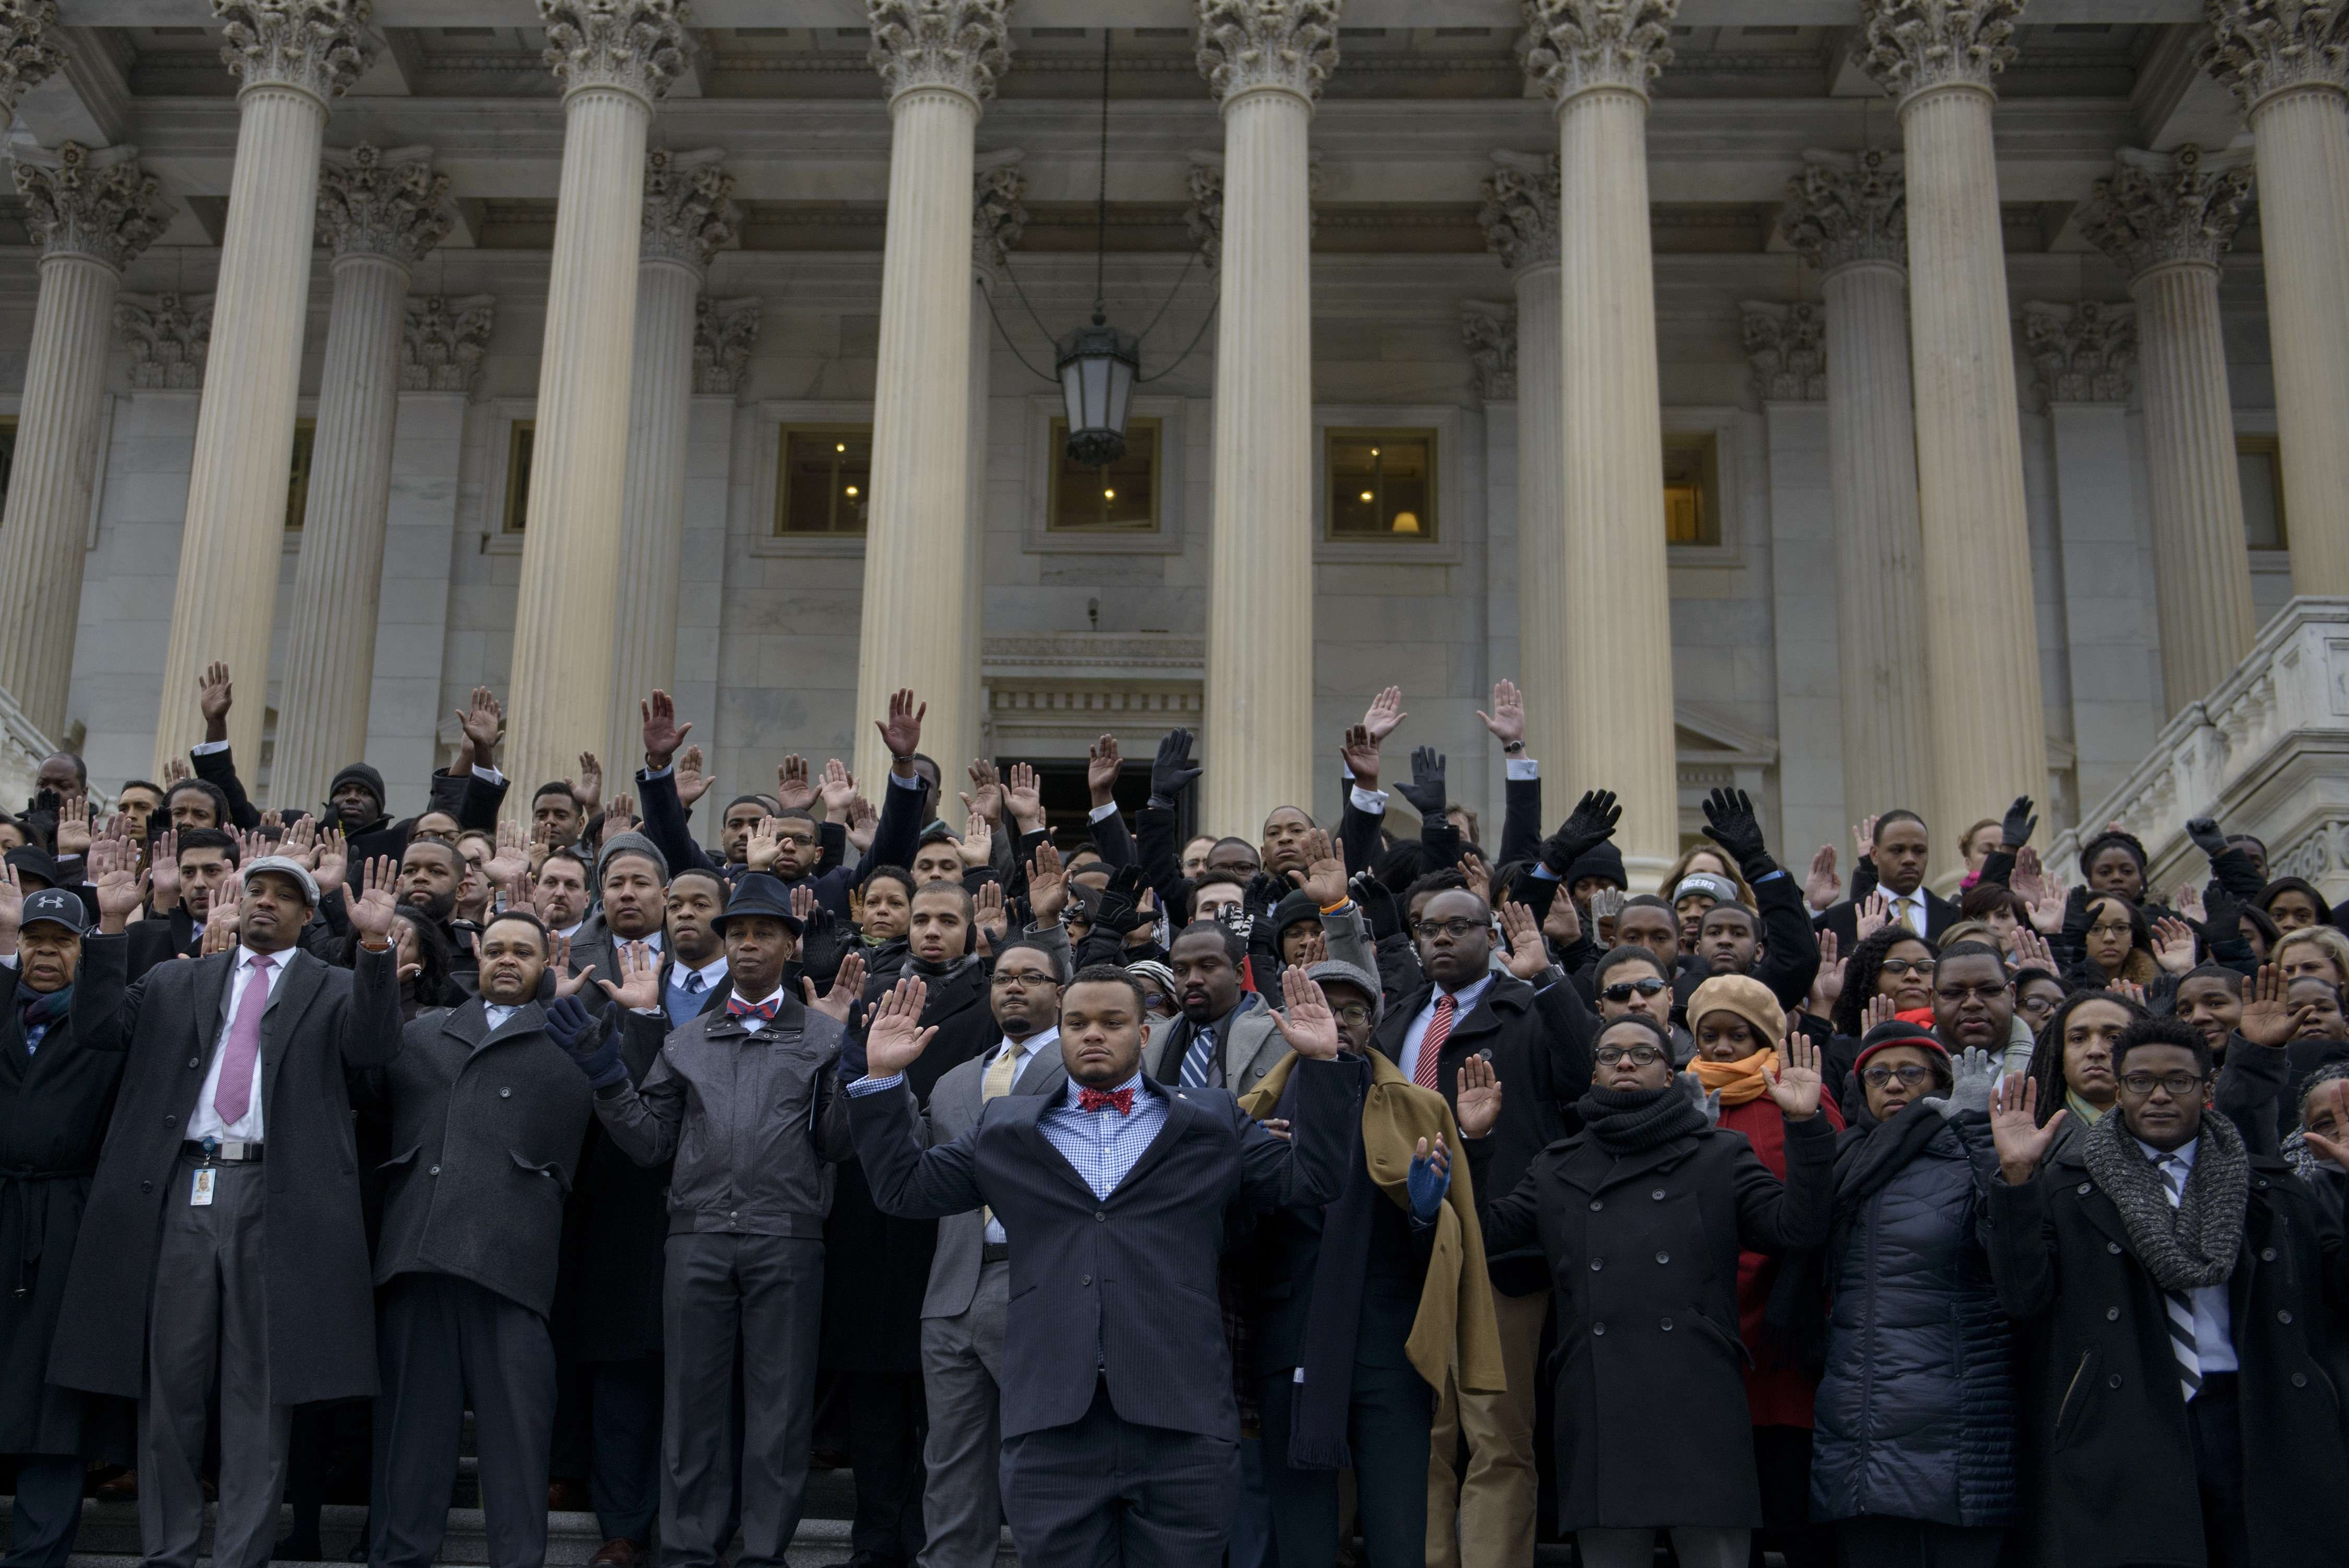 African-American Congressional staff and others hold their hands up during a walk-out outside the House on Capitol Hill on Dec. 11, 2014 in Washington D.C. (Brendan Smialowski—AFP/Getty Images)